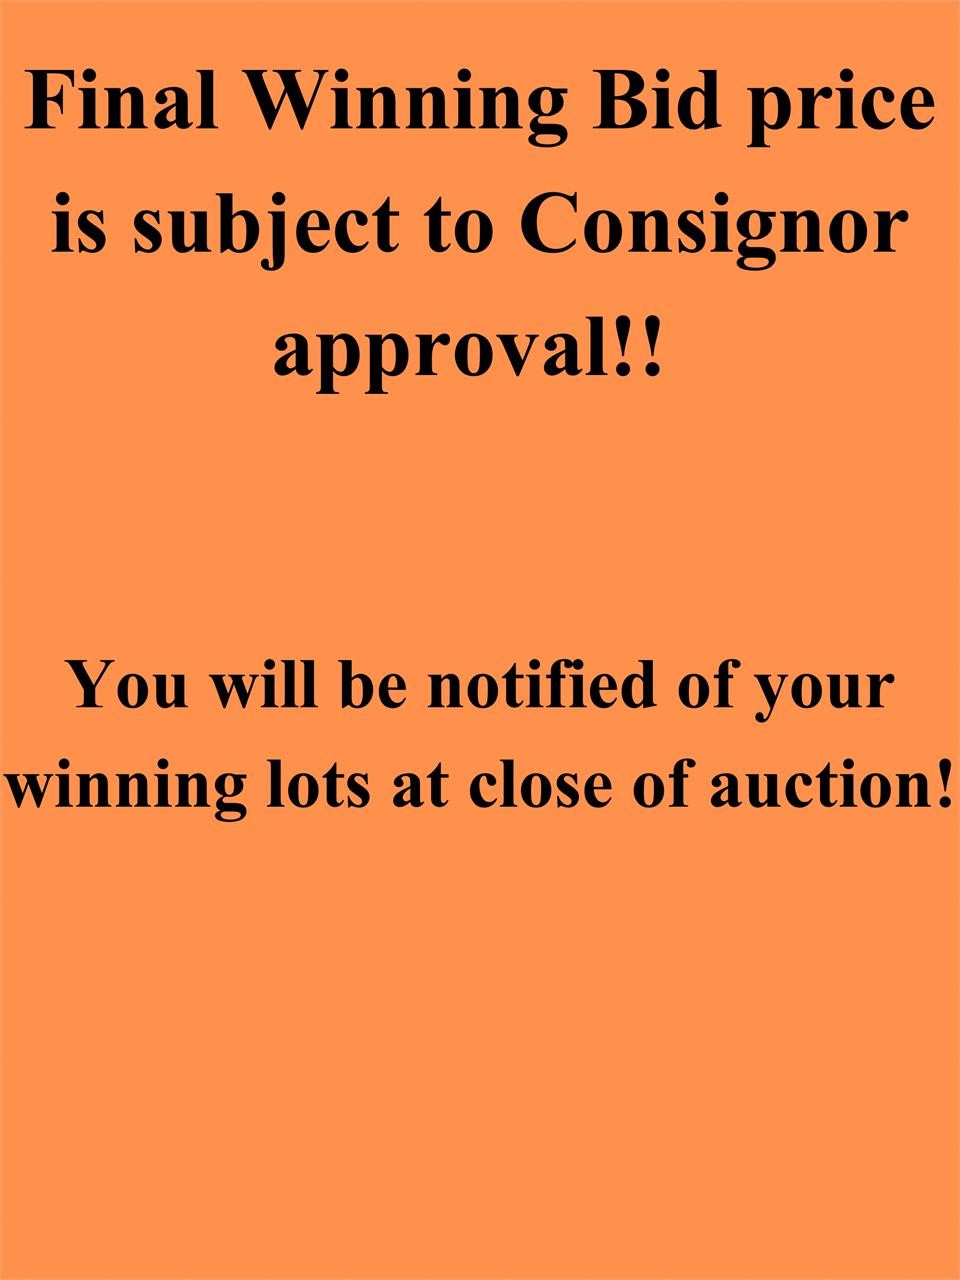 Final Bid price is subject to Consignor approval